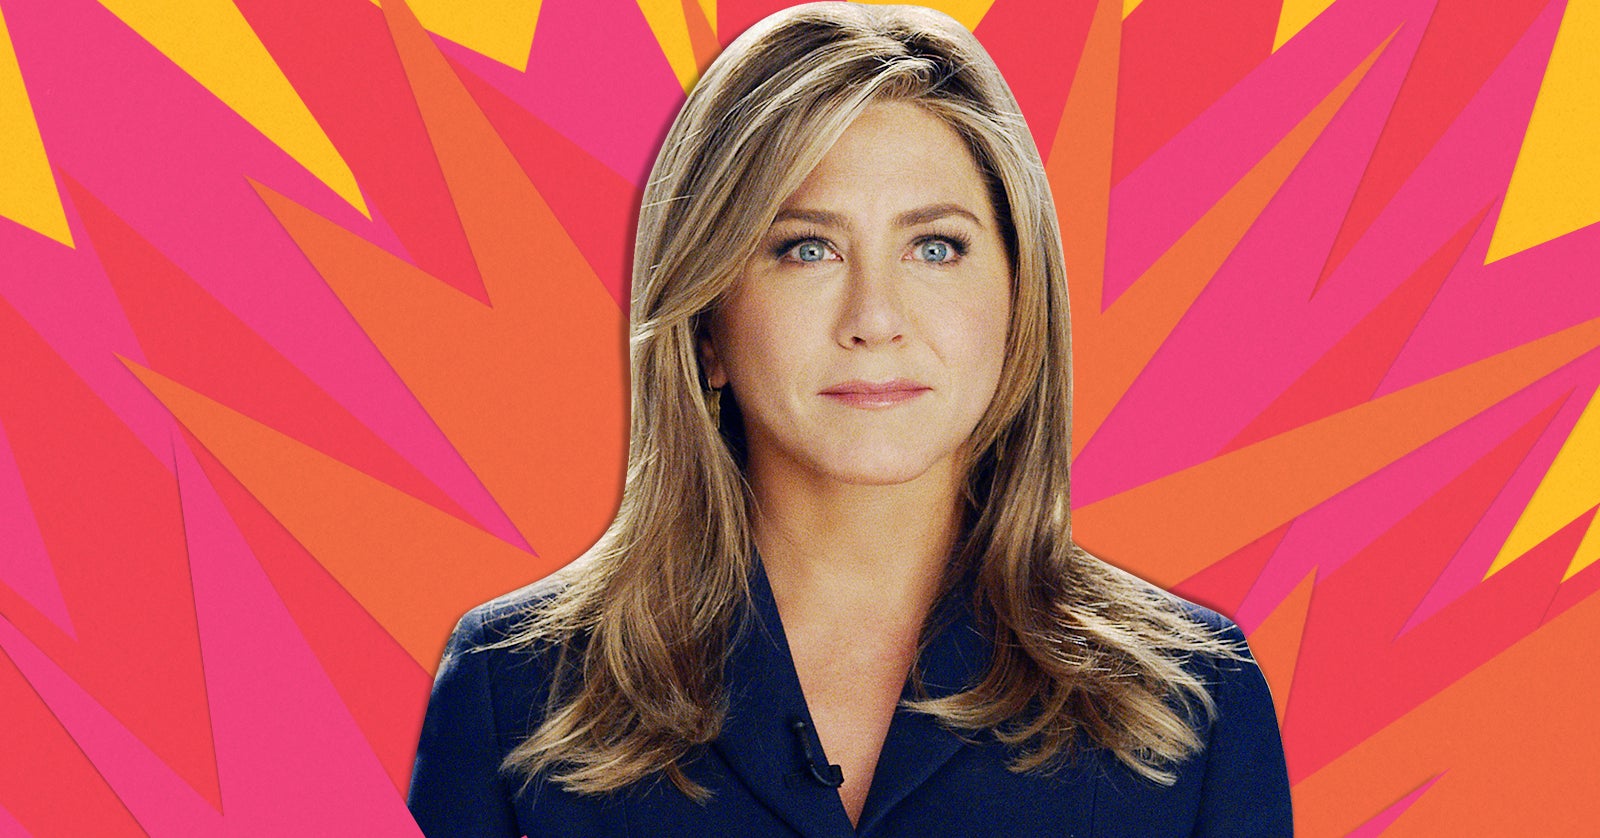 Jennifer Aniston Is Angry Now And It’s Thrilling To Watch - BuzzFeed News